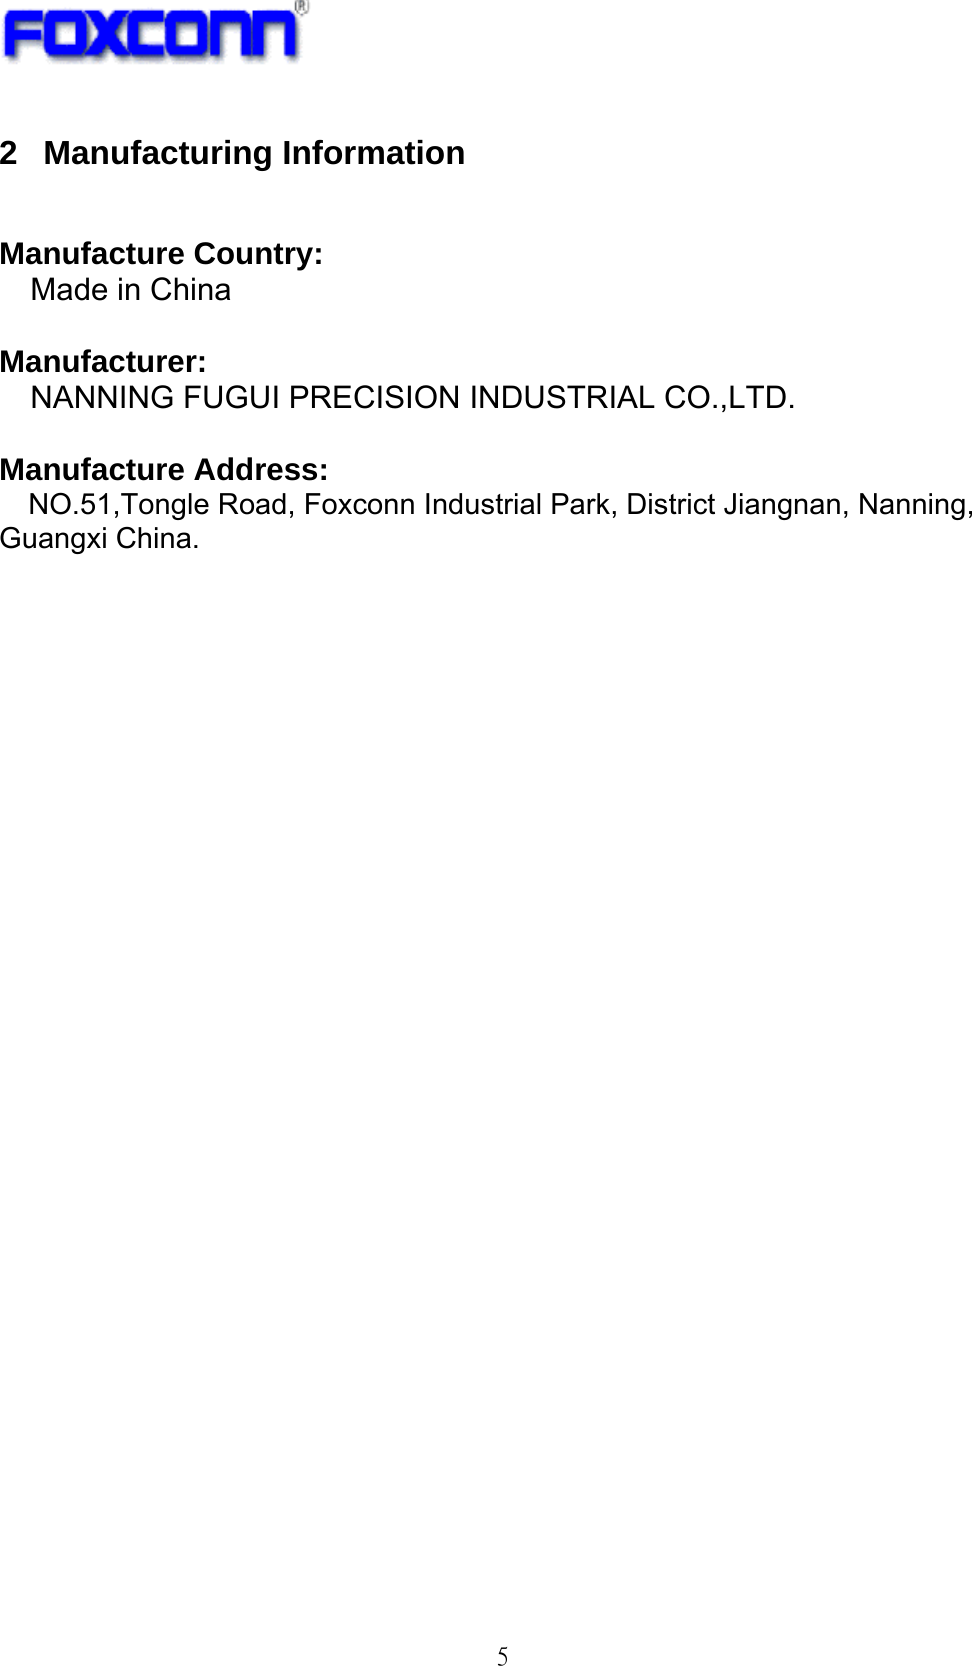   5 2  Manufacturing Information   Manufacture Country:   Made in China  Manufacturer:  NANNING FUGUI PRECISION INDUSTRIAL CO.,LTD.  Manufacture Address:   NO.51,Tongle Road, Foxconn Industrial Park, District Jiangnan, Nanning, Guangxi China.   